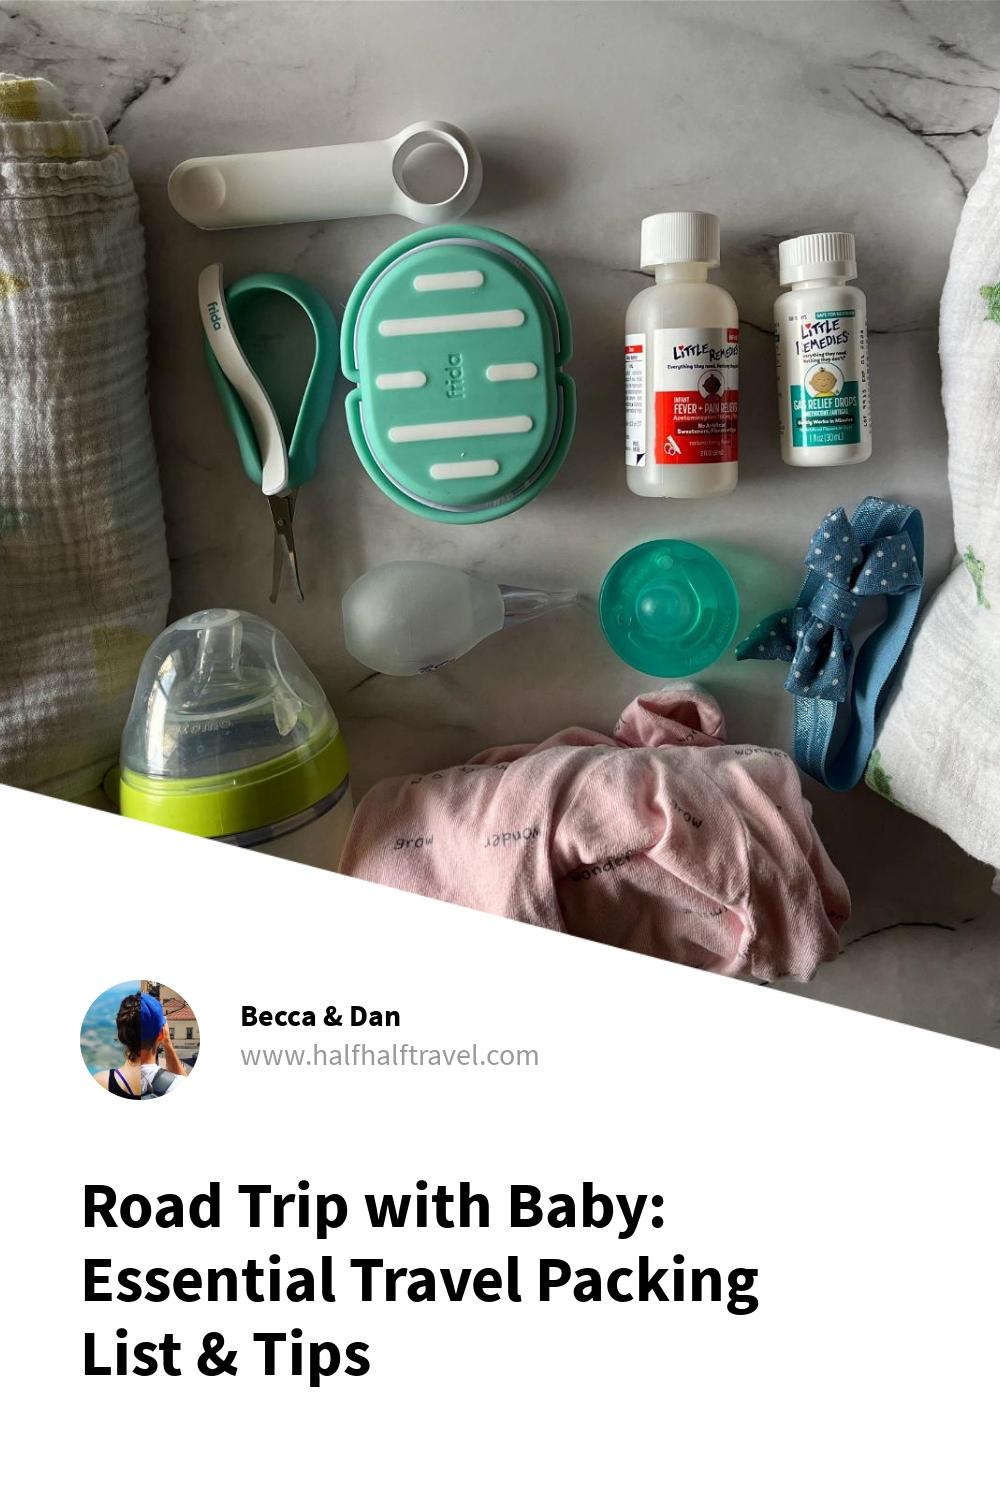 Pinterest image from the 'Road Trip with Baby: Essential Travel Packing List & Tips' article on Half Half Travel